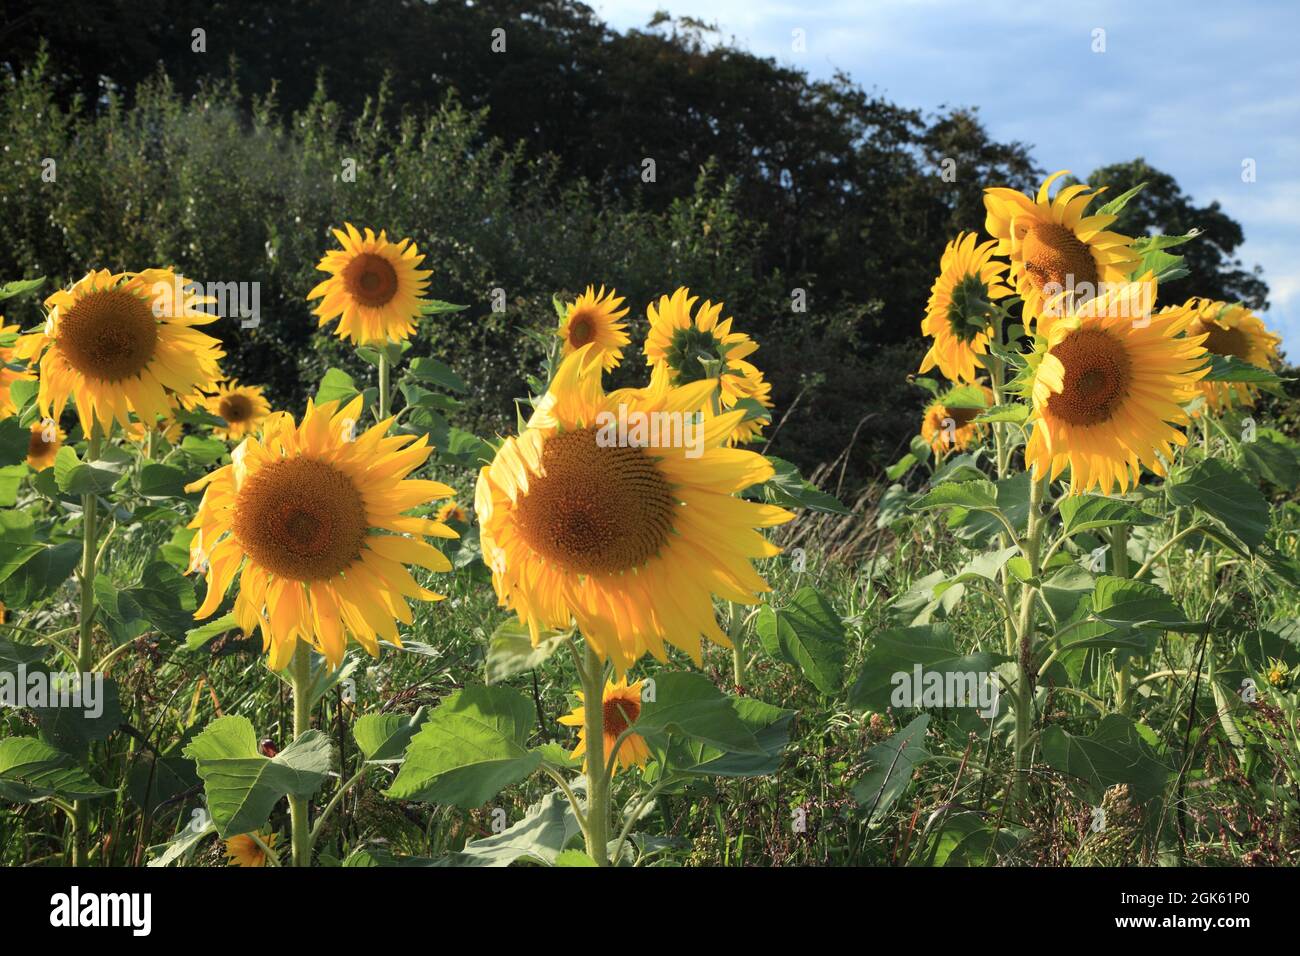 Sunflowers, Helianthus annuus, in drift, edge of agricultural field, Norfolk, England Stock Photo